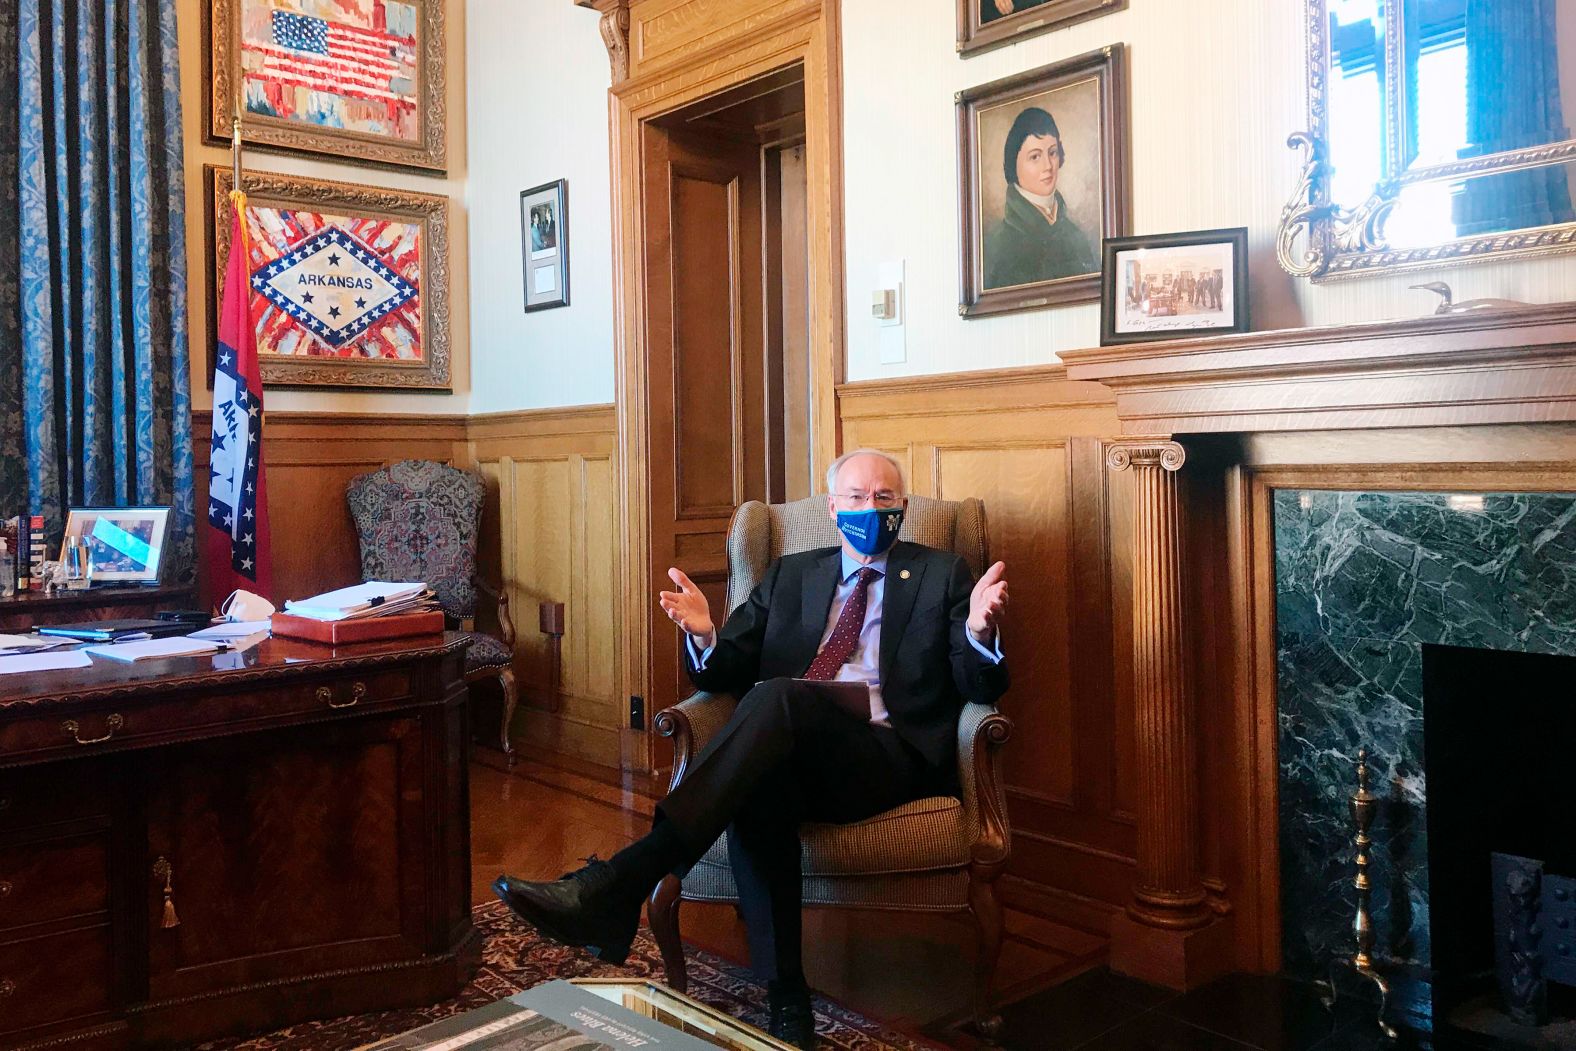 Hutchinson speaks in his office in Little Rock in January 2021. In what may differentiate him from other Republican candidates, Hutchinson as governor did not downplay the coronavirus when the pandemic hit the United States. He encouraged his constituents to get the vaccine but objected to the Biden administration's vaccine mandates. While he approved a statewide ban on face mask mandates, he later said he regretted doing so.